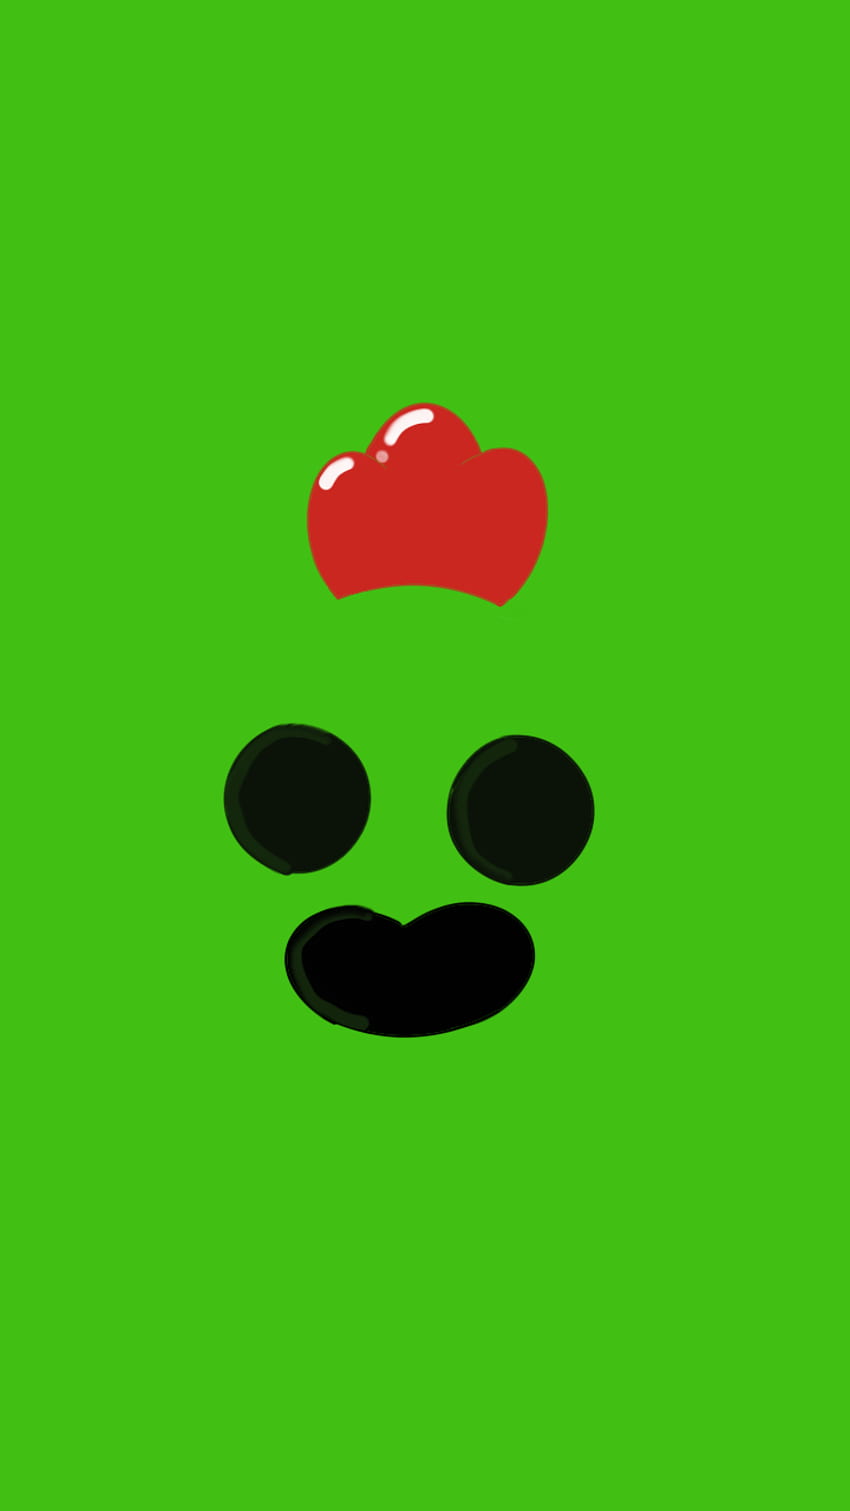 Here have this simple of Spike. : Brawlstars HD phone wallpaper